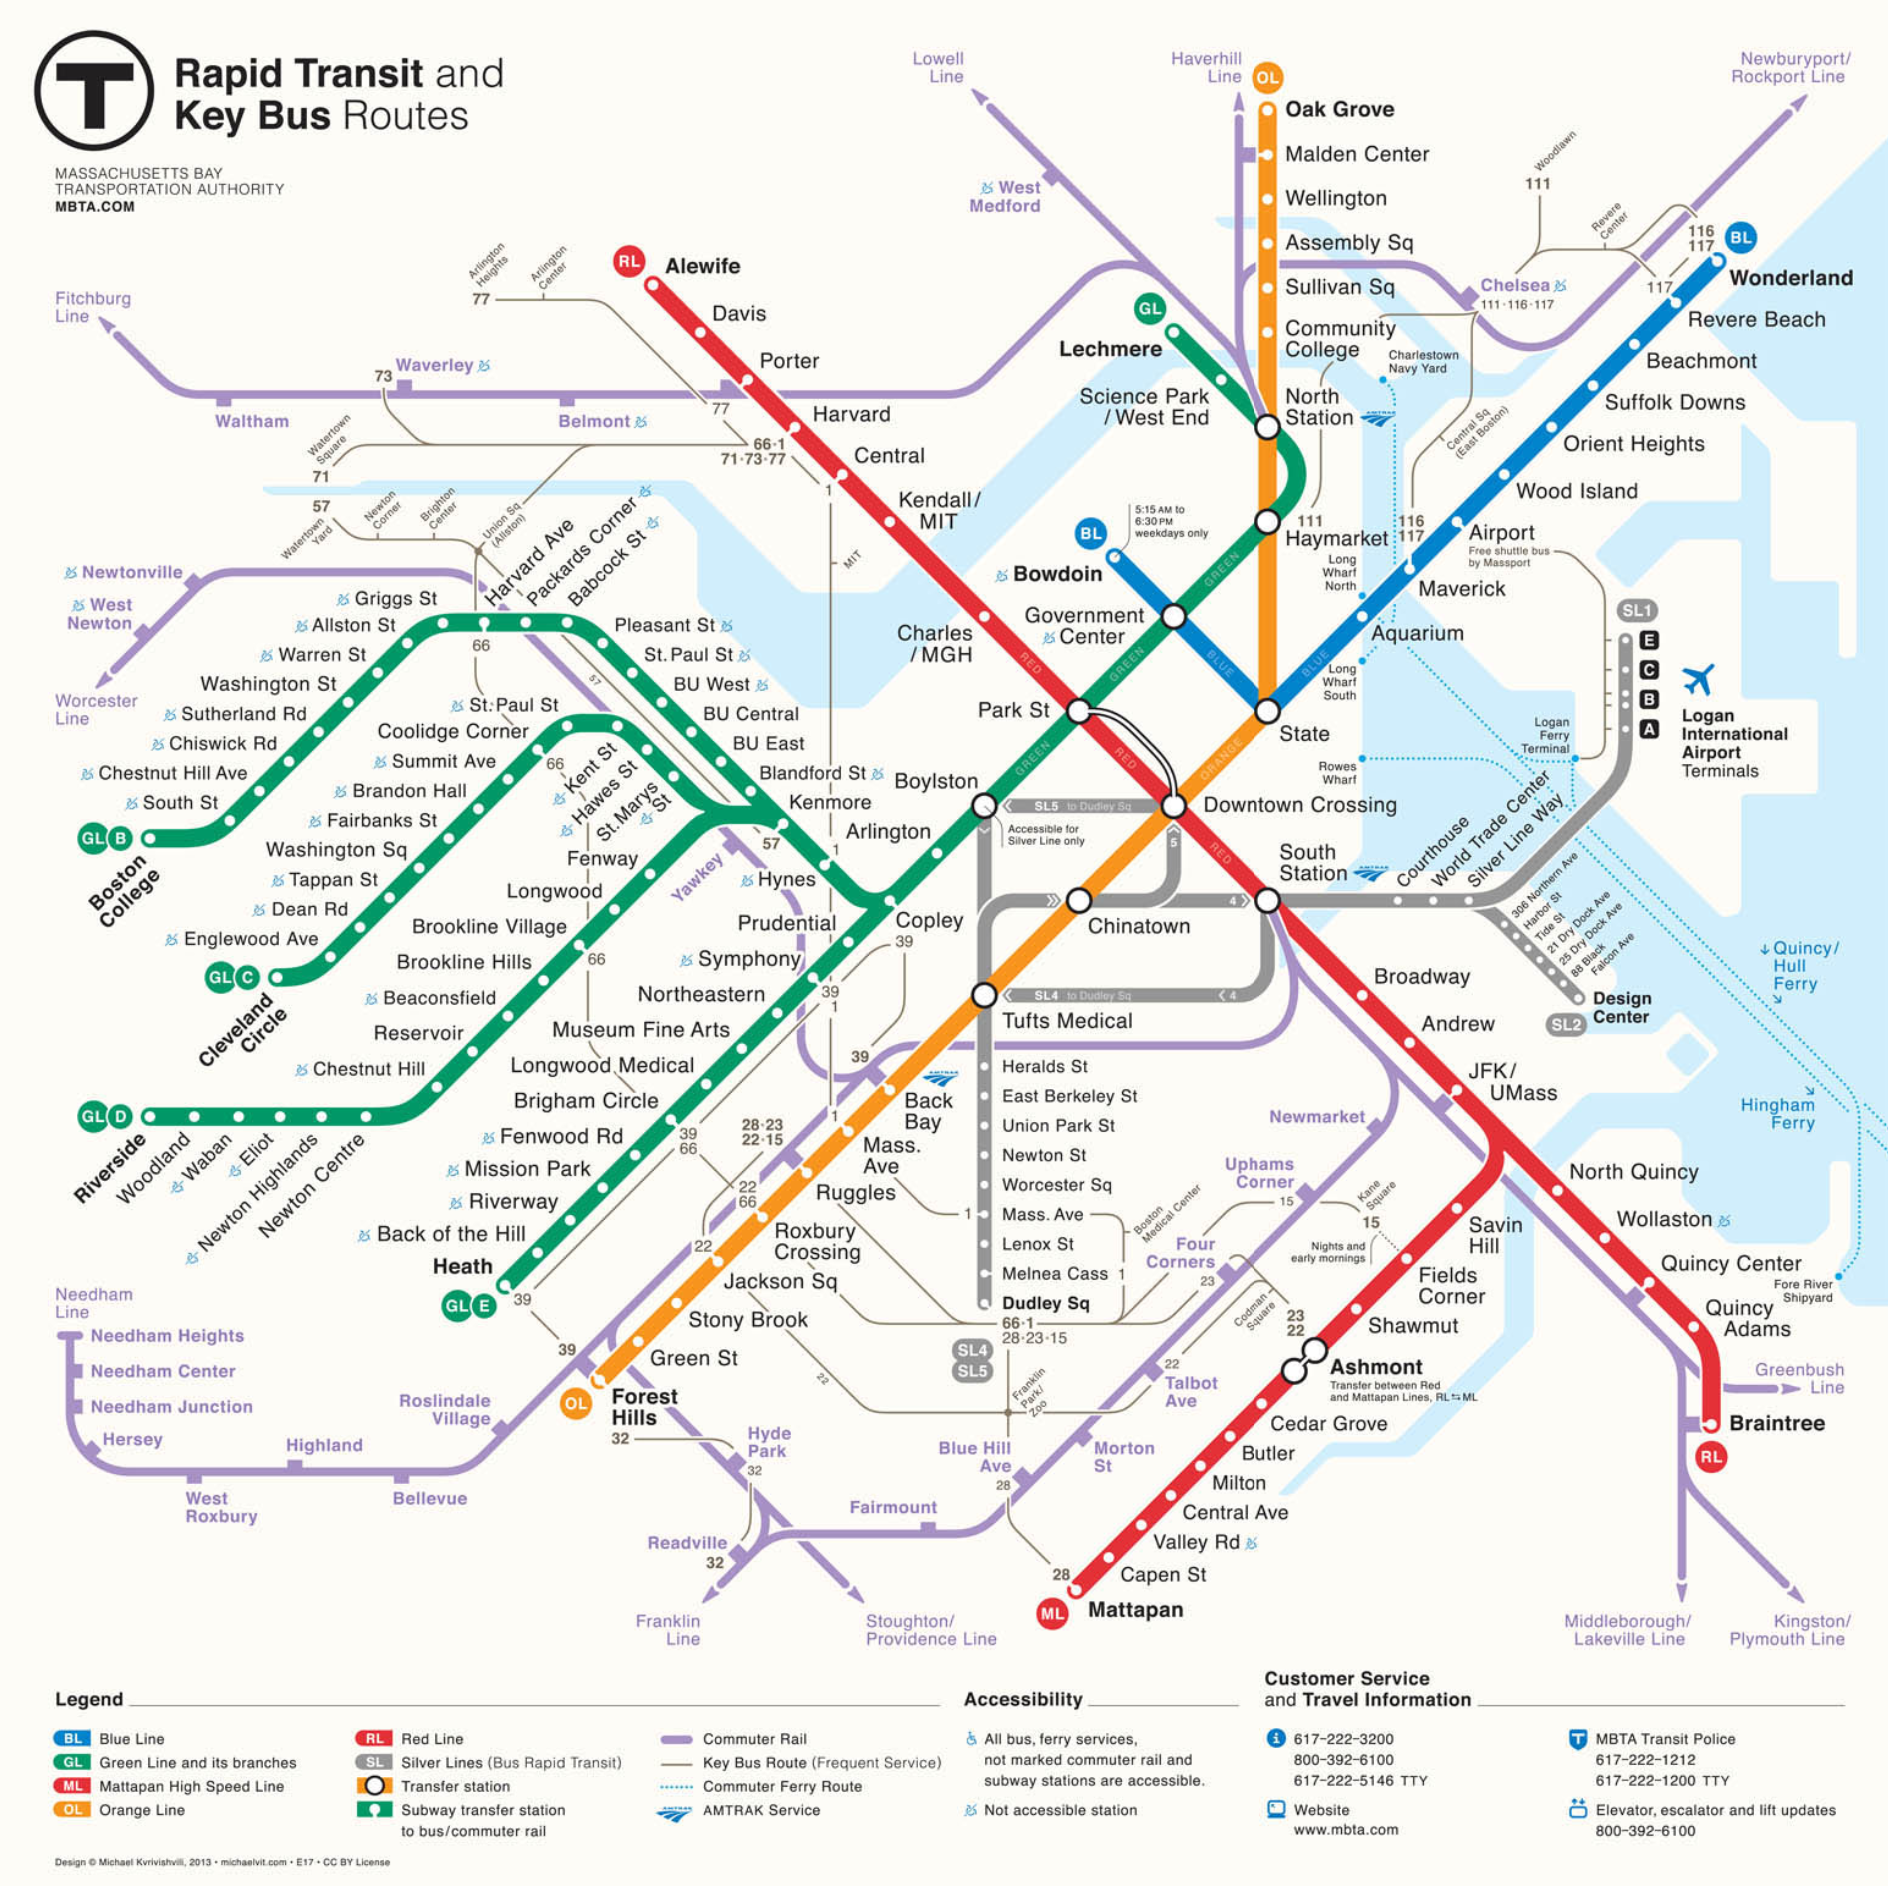 This map by Michael Kvrivishvili includes several firsts for MBTA maps, including having every bus and trolley stop labeled, showing Silver Line directional arrows. It includes Commuter Rail lines and stations in lavender, numbers of major bus routes, ferry routes, and waterways in pale blue. It notes which stations are NOT accessible instead of which ones ARE.